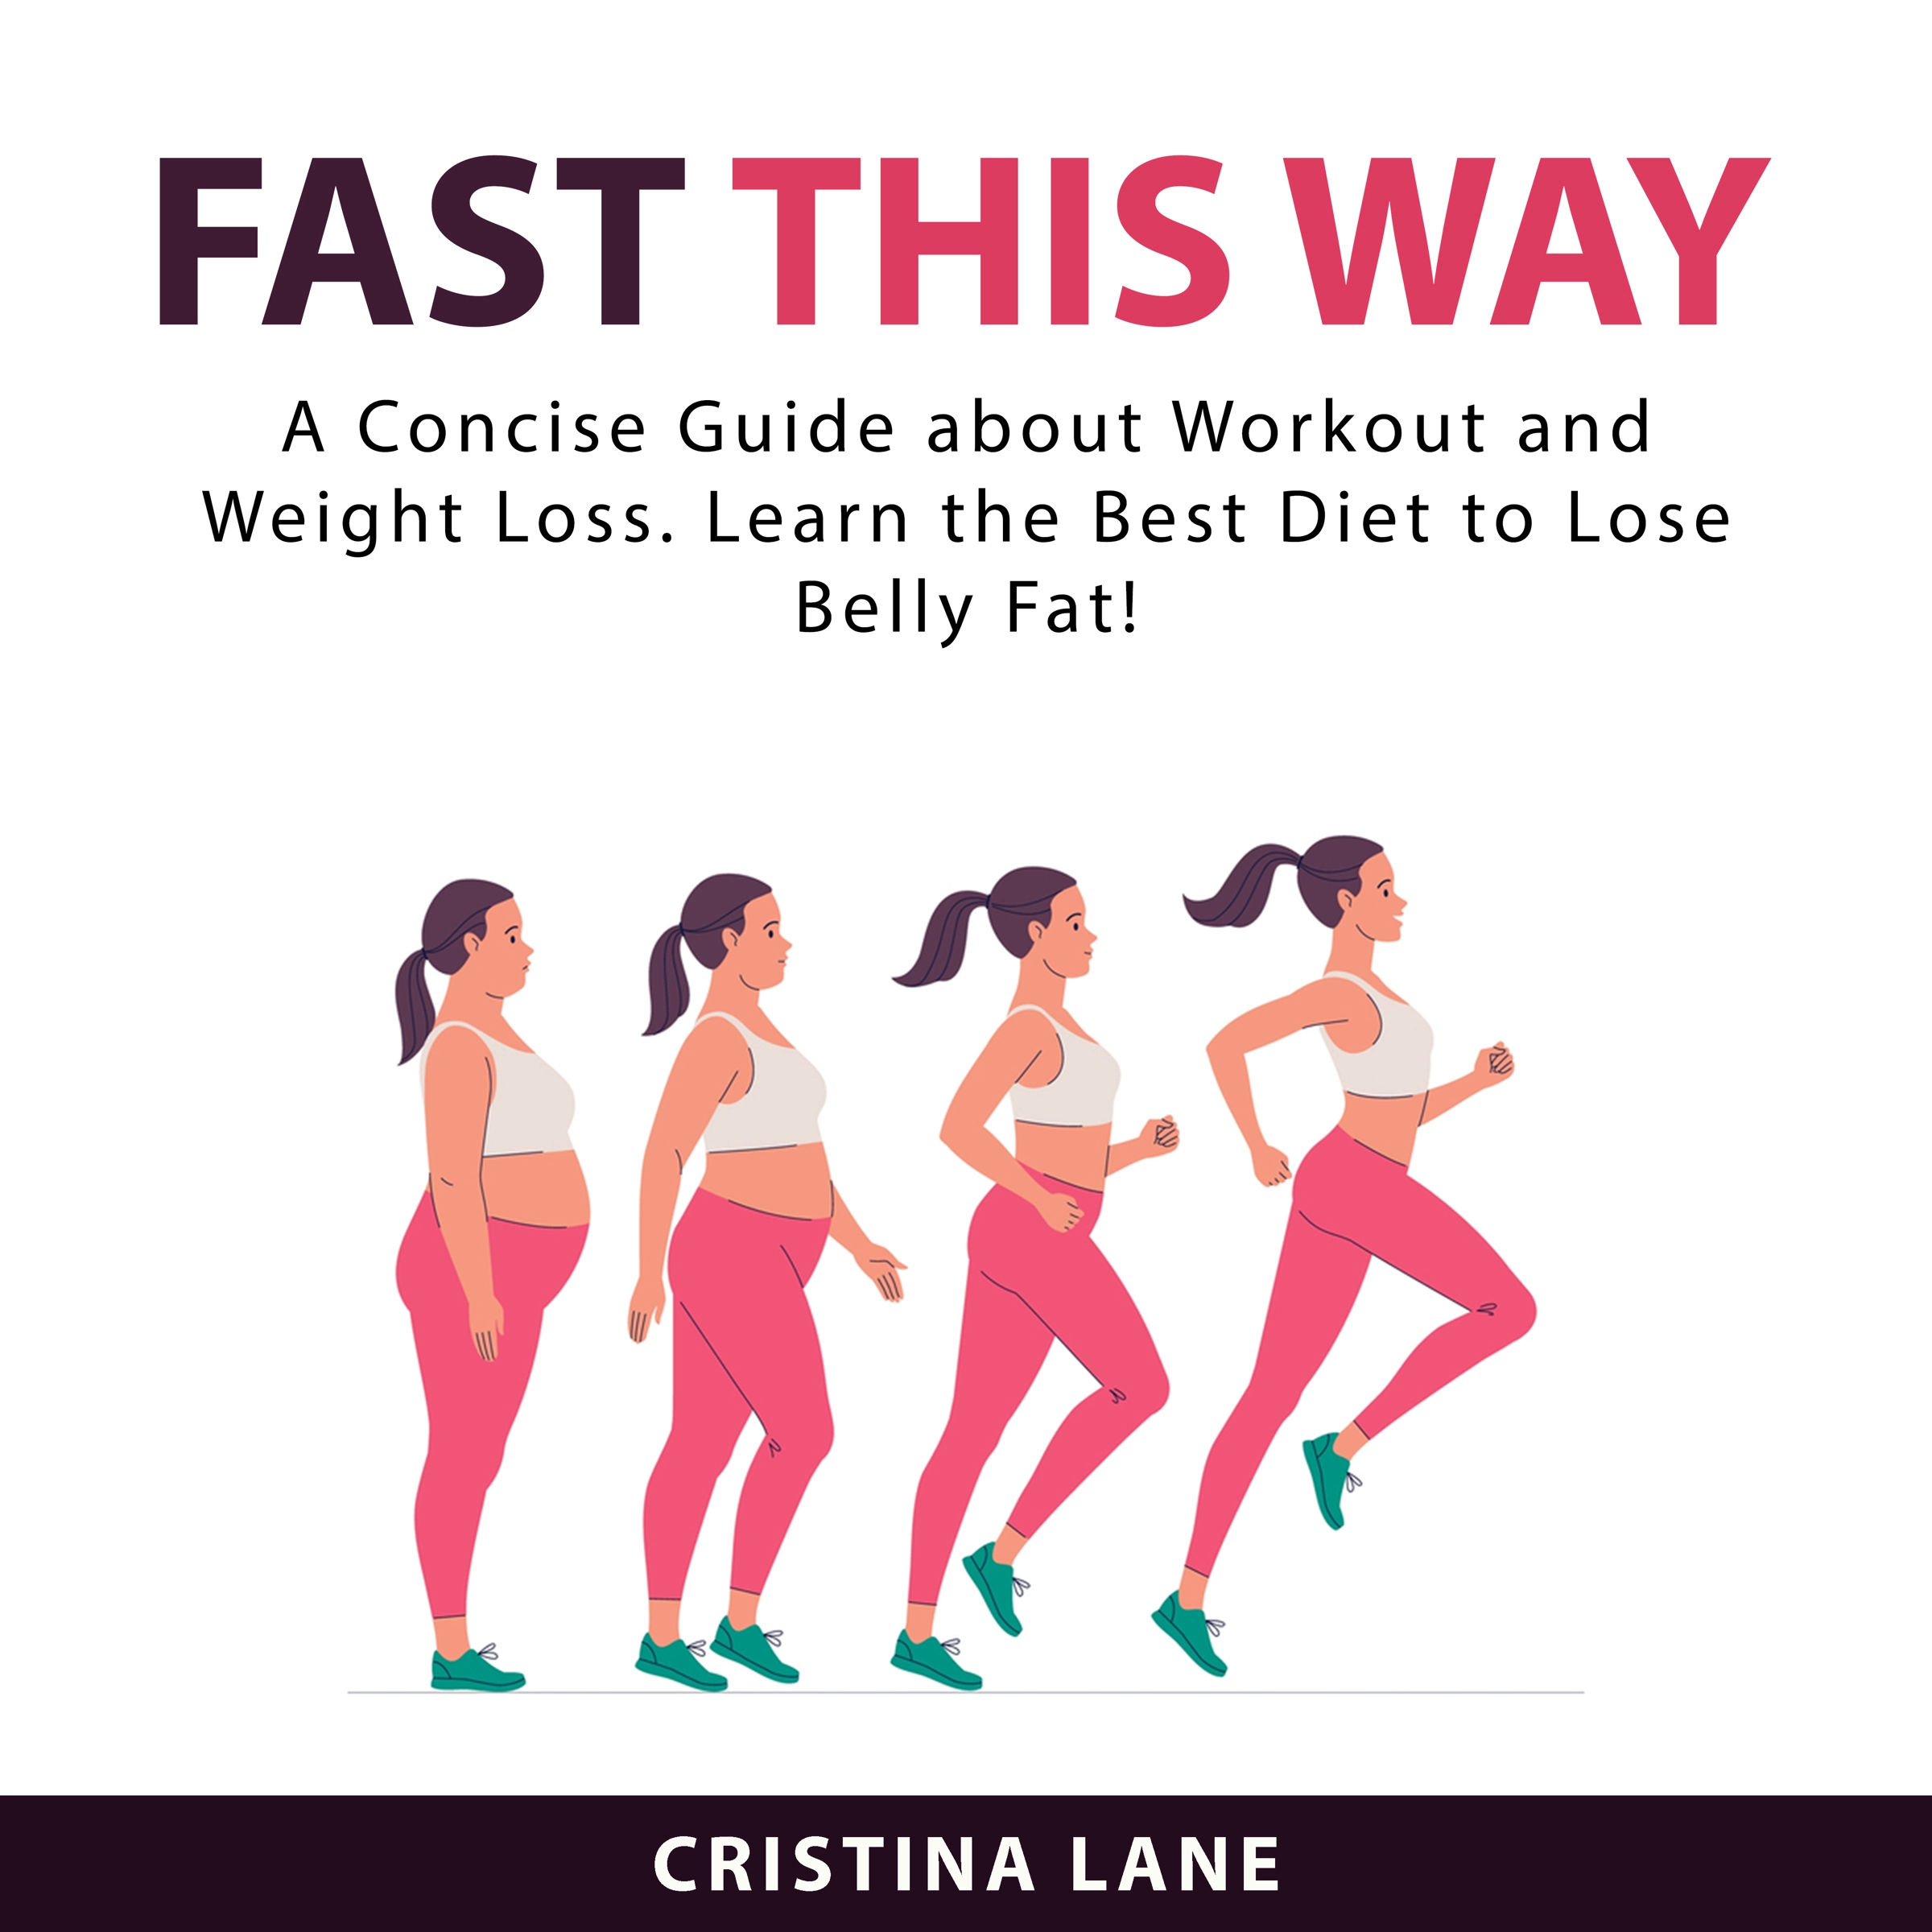 Fast This Way Audiobook by Cristina Lane